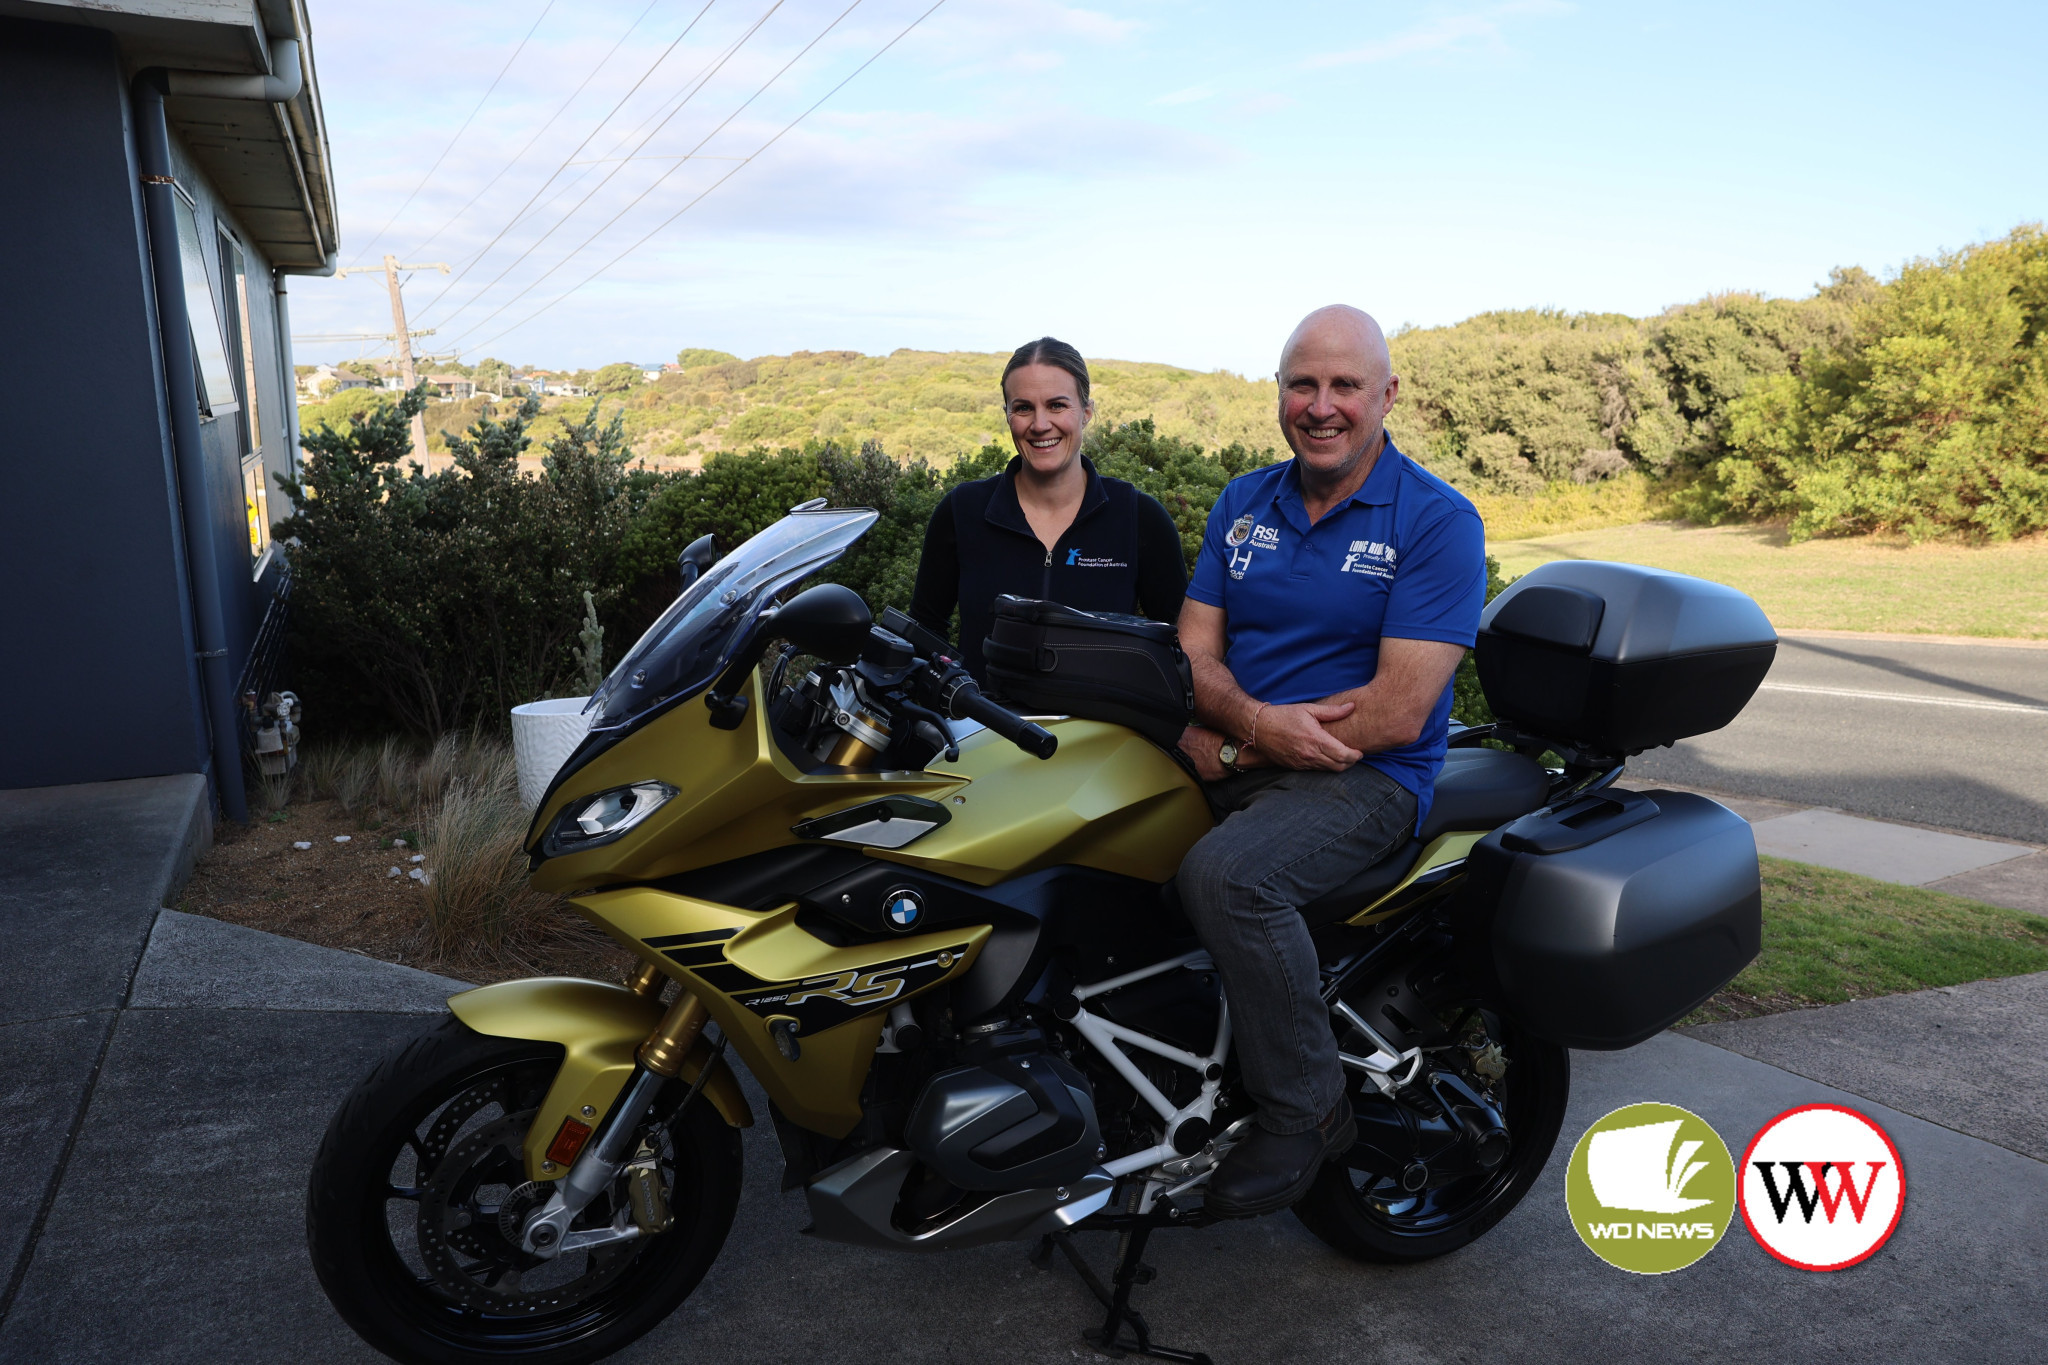 Ready to roll: David Mills is looking forward to taking part in this year’s ‘The Long Ride’ to raise awareness and funds for prostate cancer research. Also pictured is prostate cancer specialist nurse Bridget Hill.